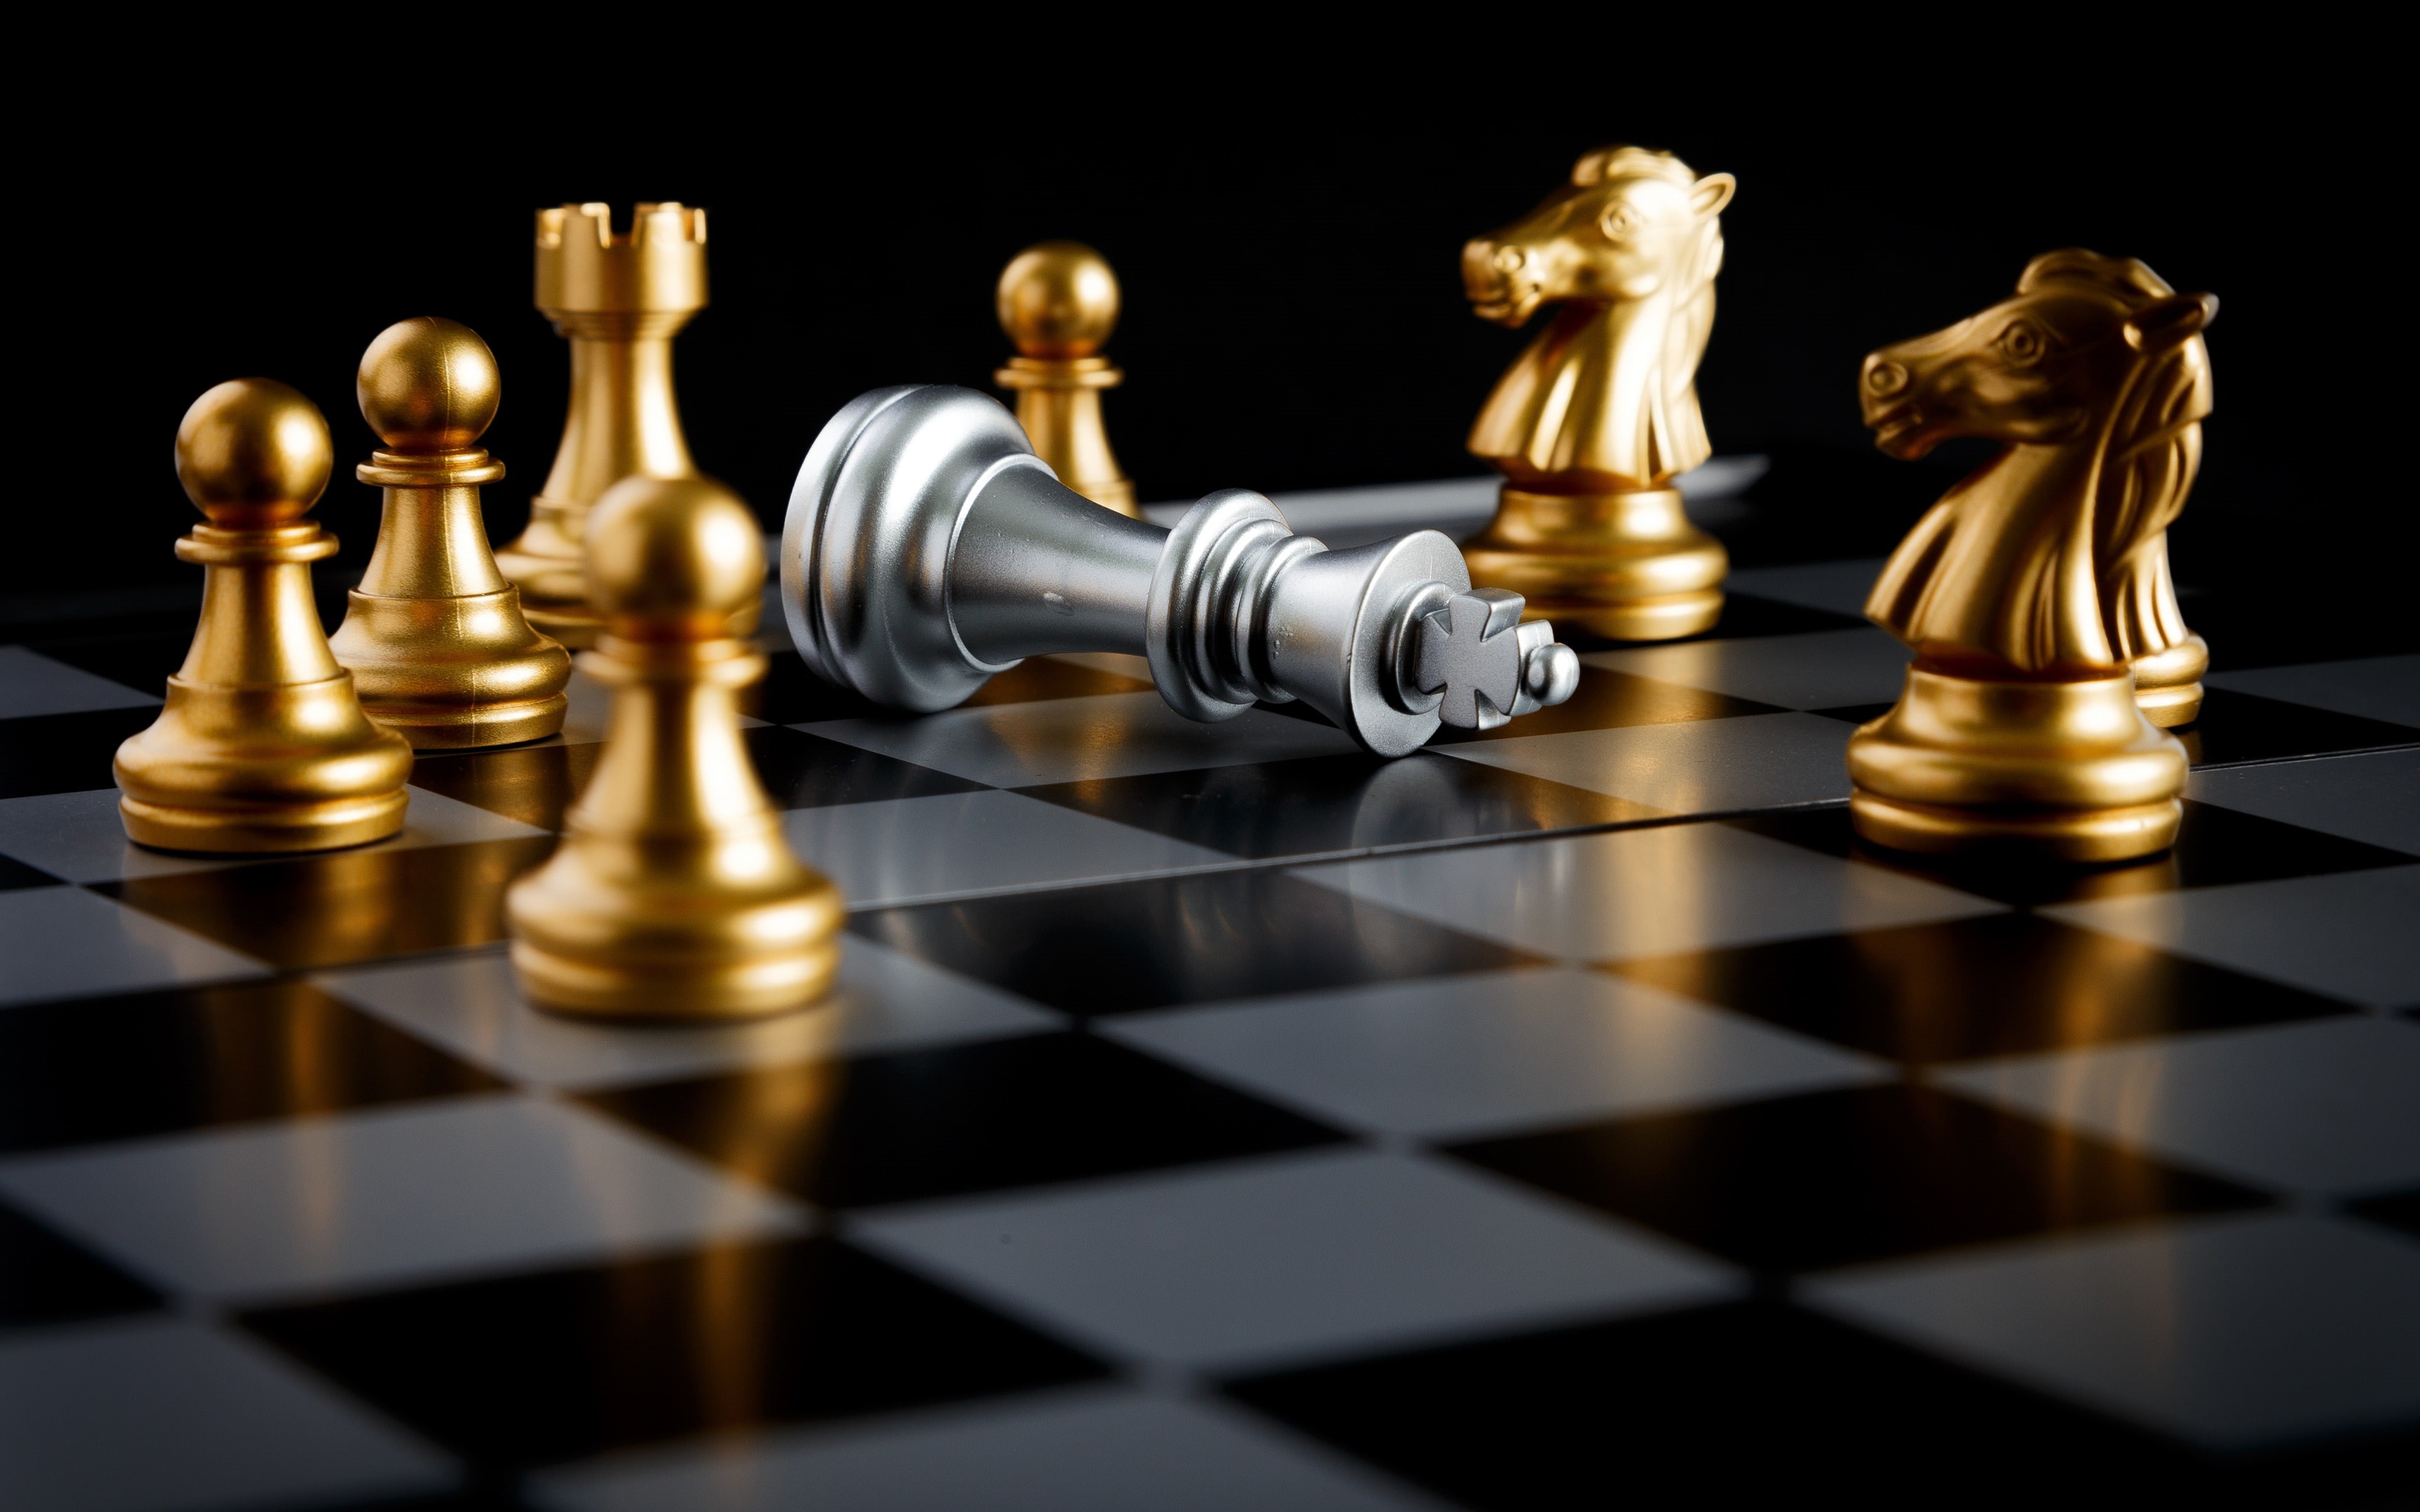 Wallpaper / conflict, aggression, chess board, indoors, chess piece, golden, confrontation, leisure activity, international, knight piece, black background free download